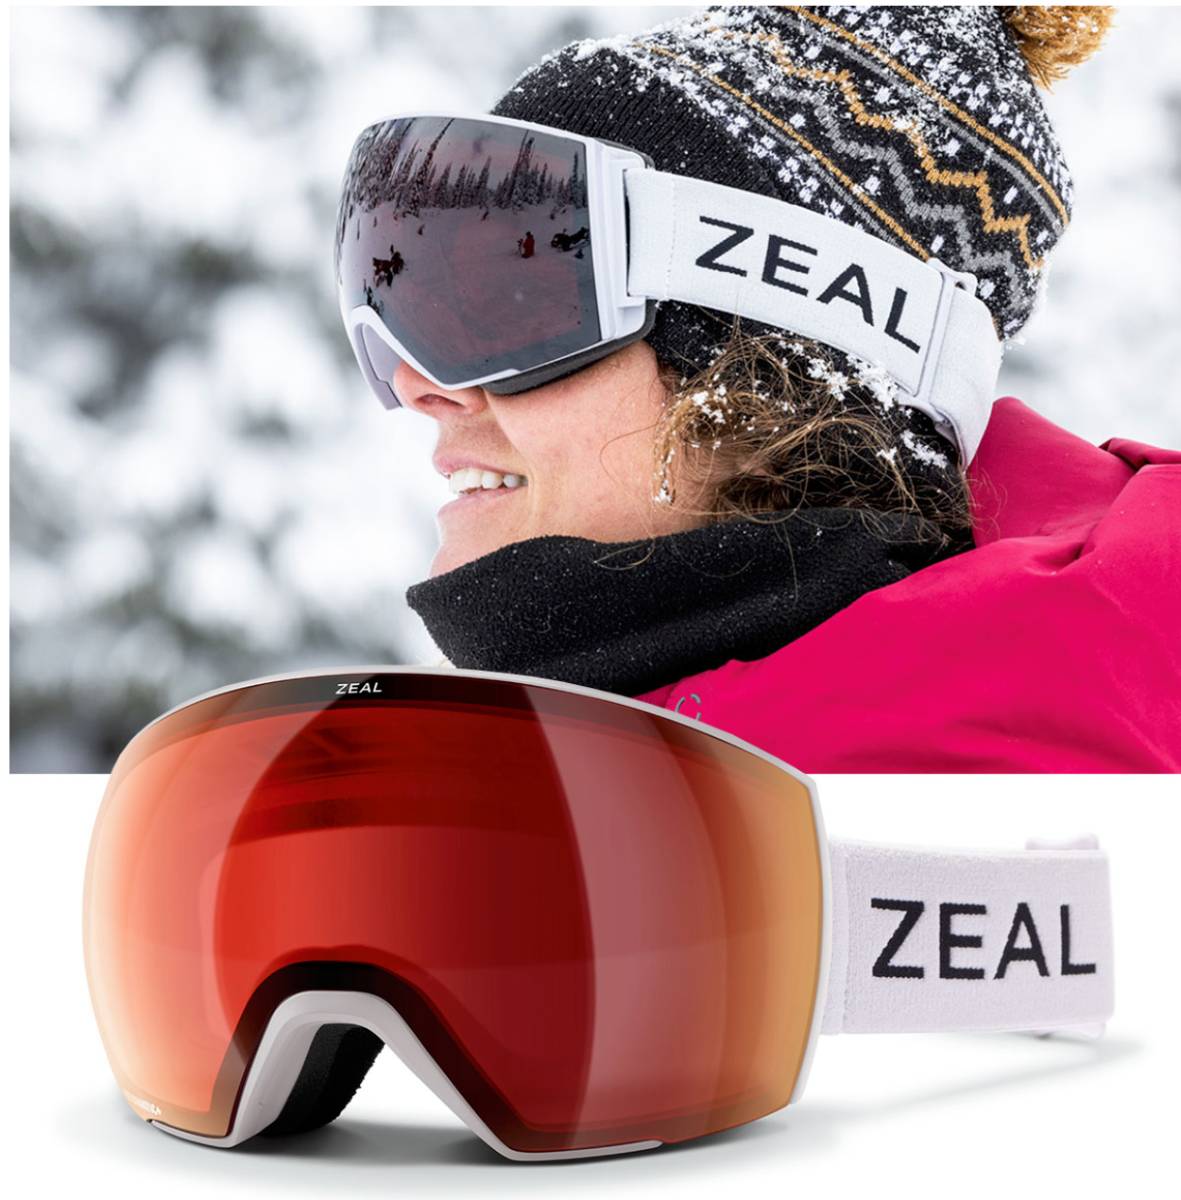 Tearsheet of an athlete sporting Zeal Optics goggles.